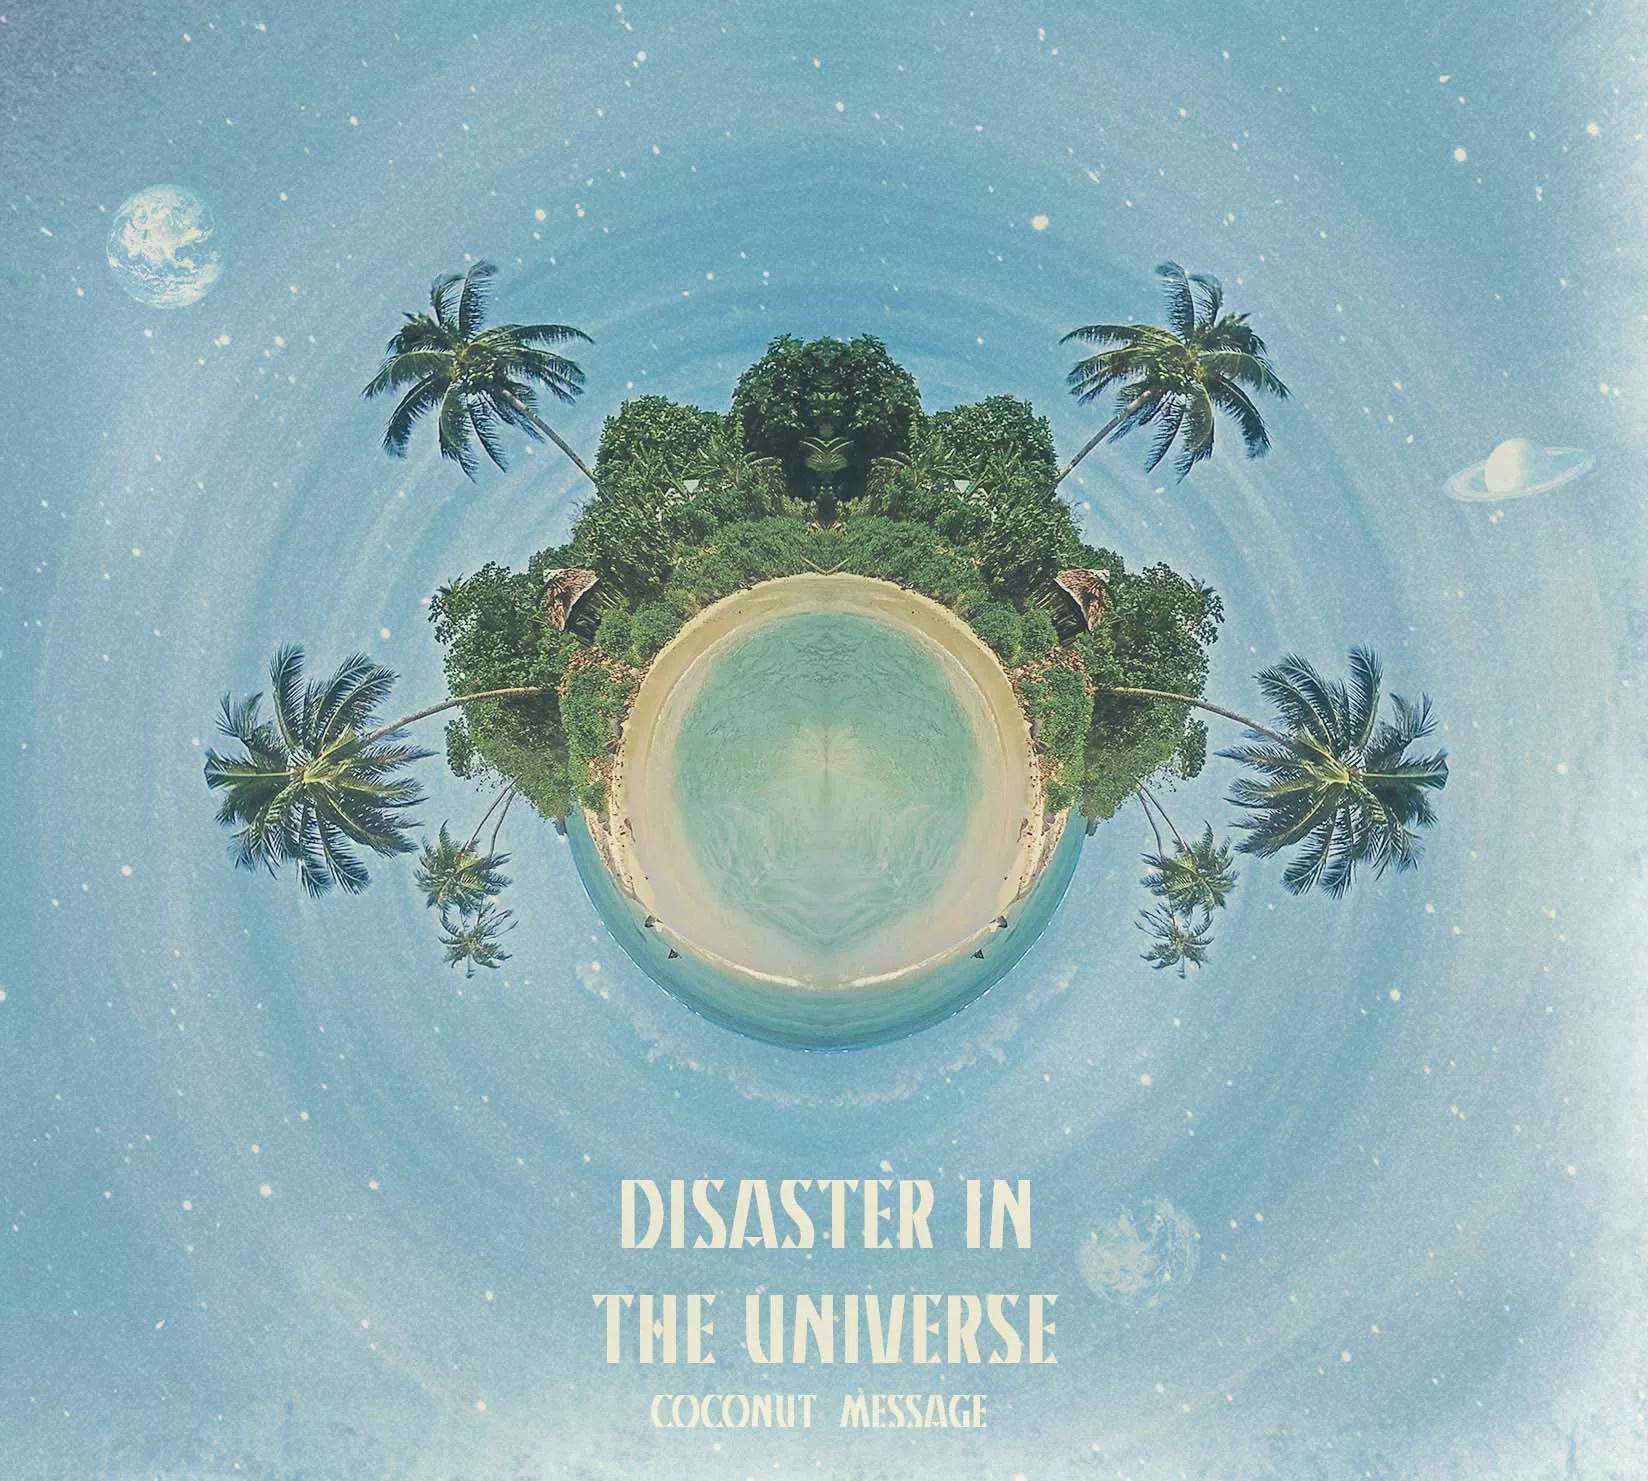 Coconut Message - Disaster In The Universe